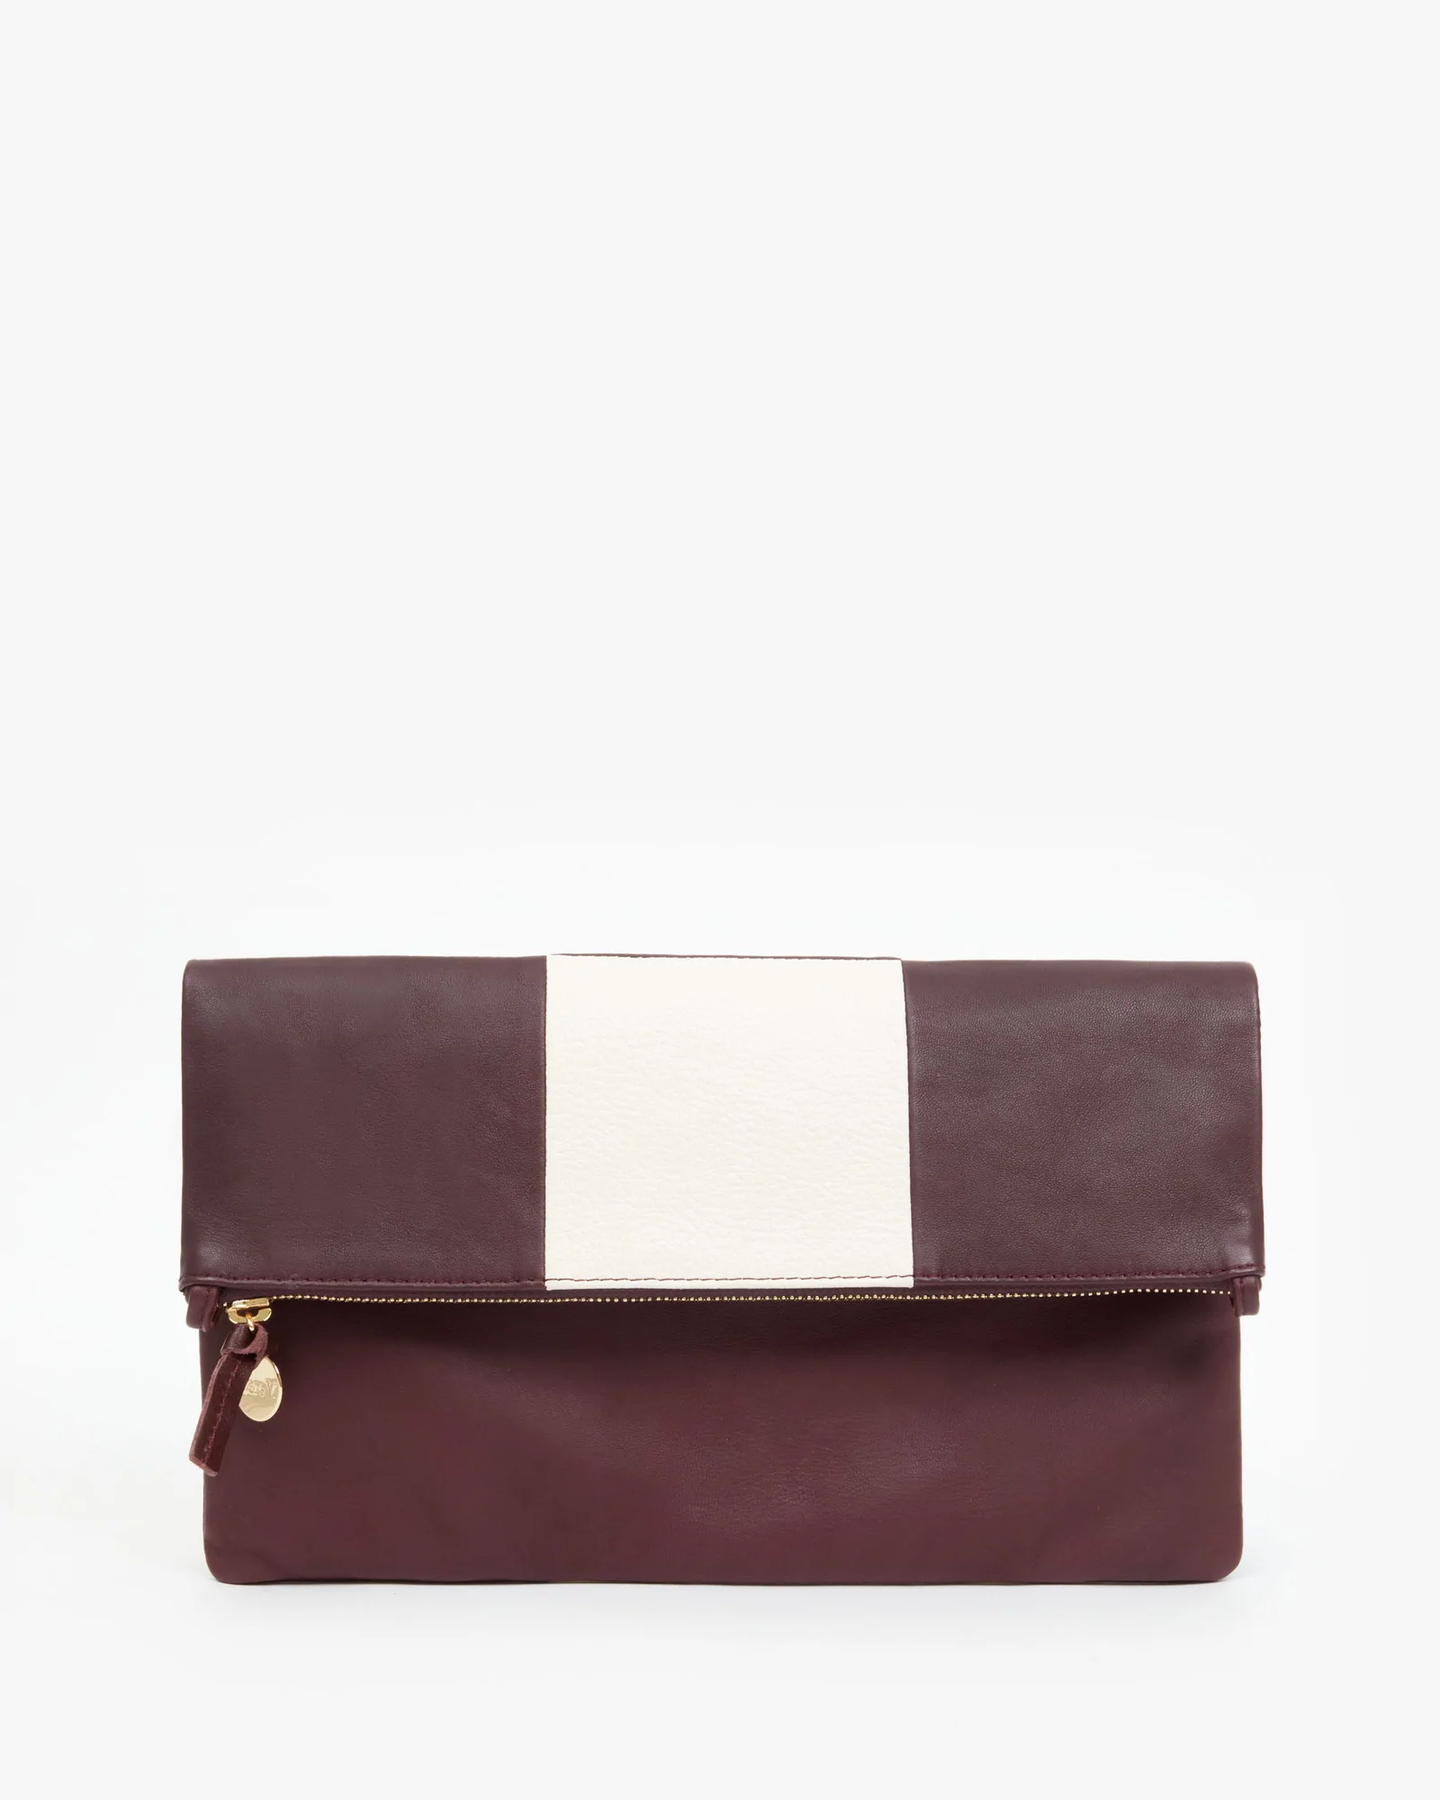 Clare V. - Foldover Clutch with Tabs in Plum Italian Nappa & Cream Goat Tile Patchwork